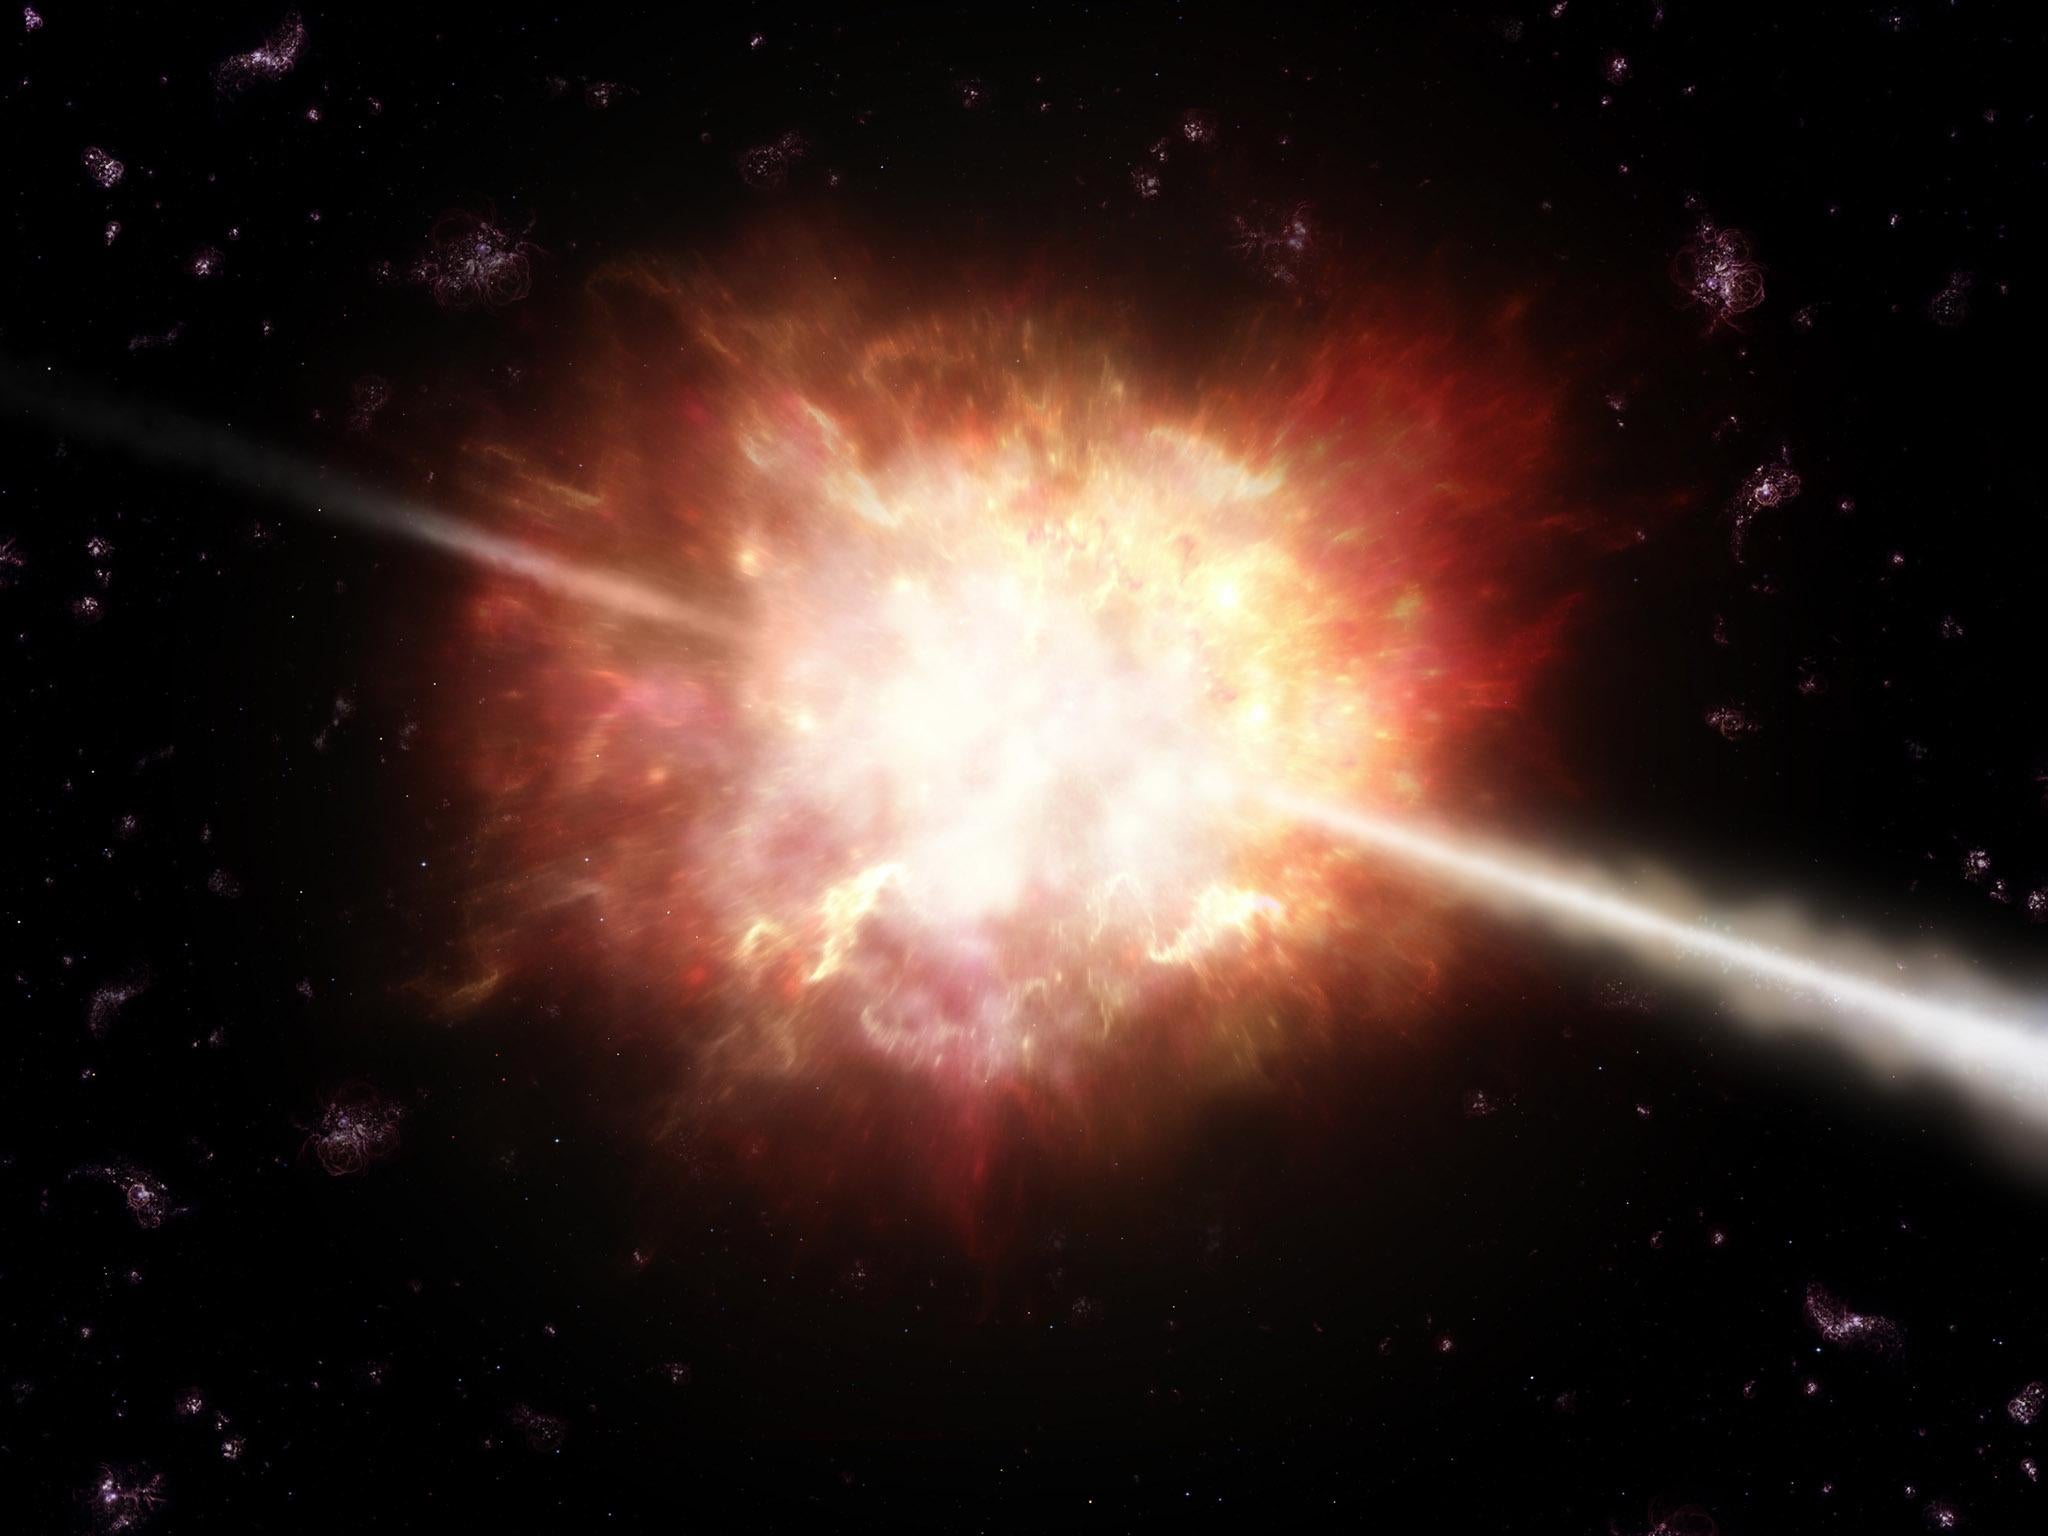 A gamma ray burst close to Earth could be devastating